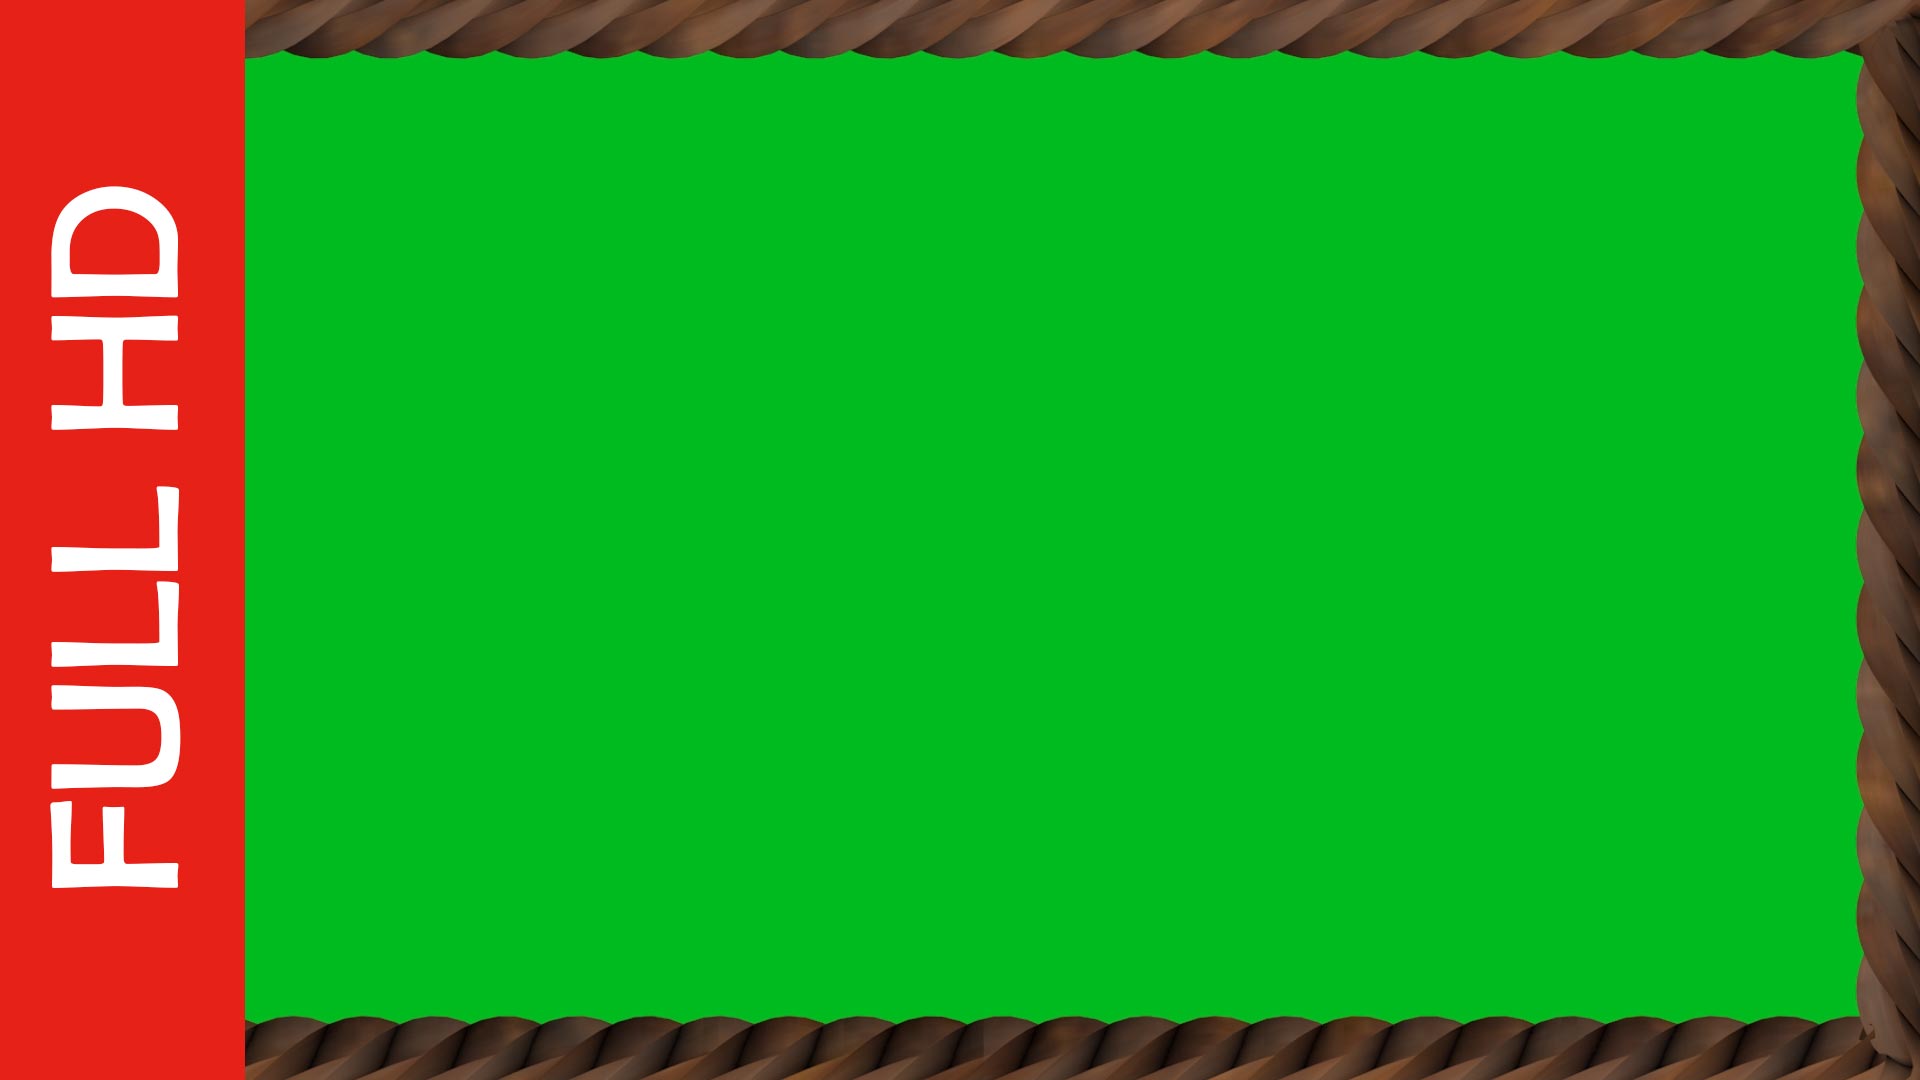 green screen background images video